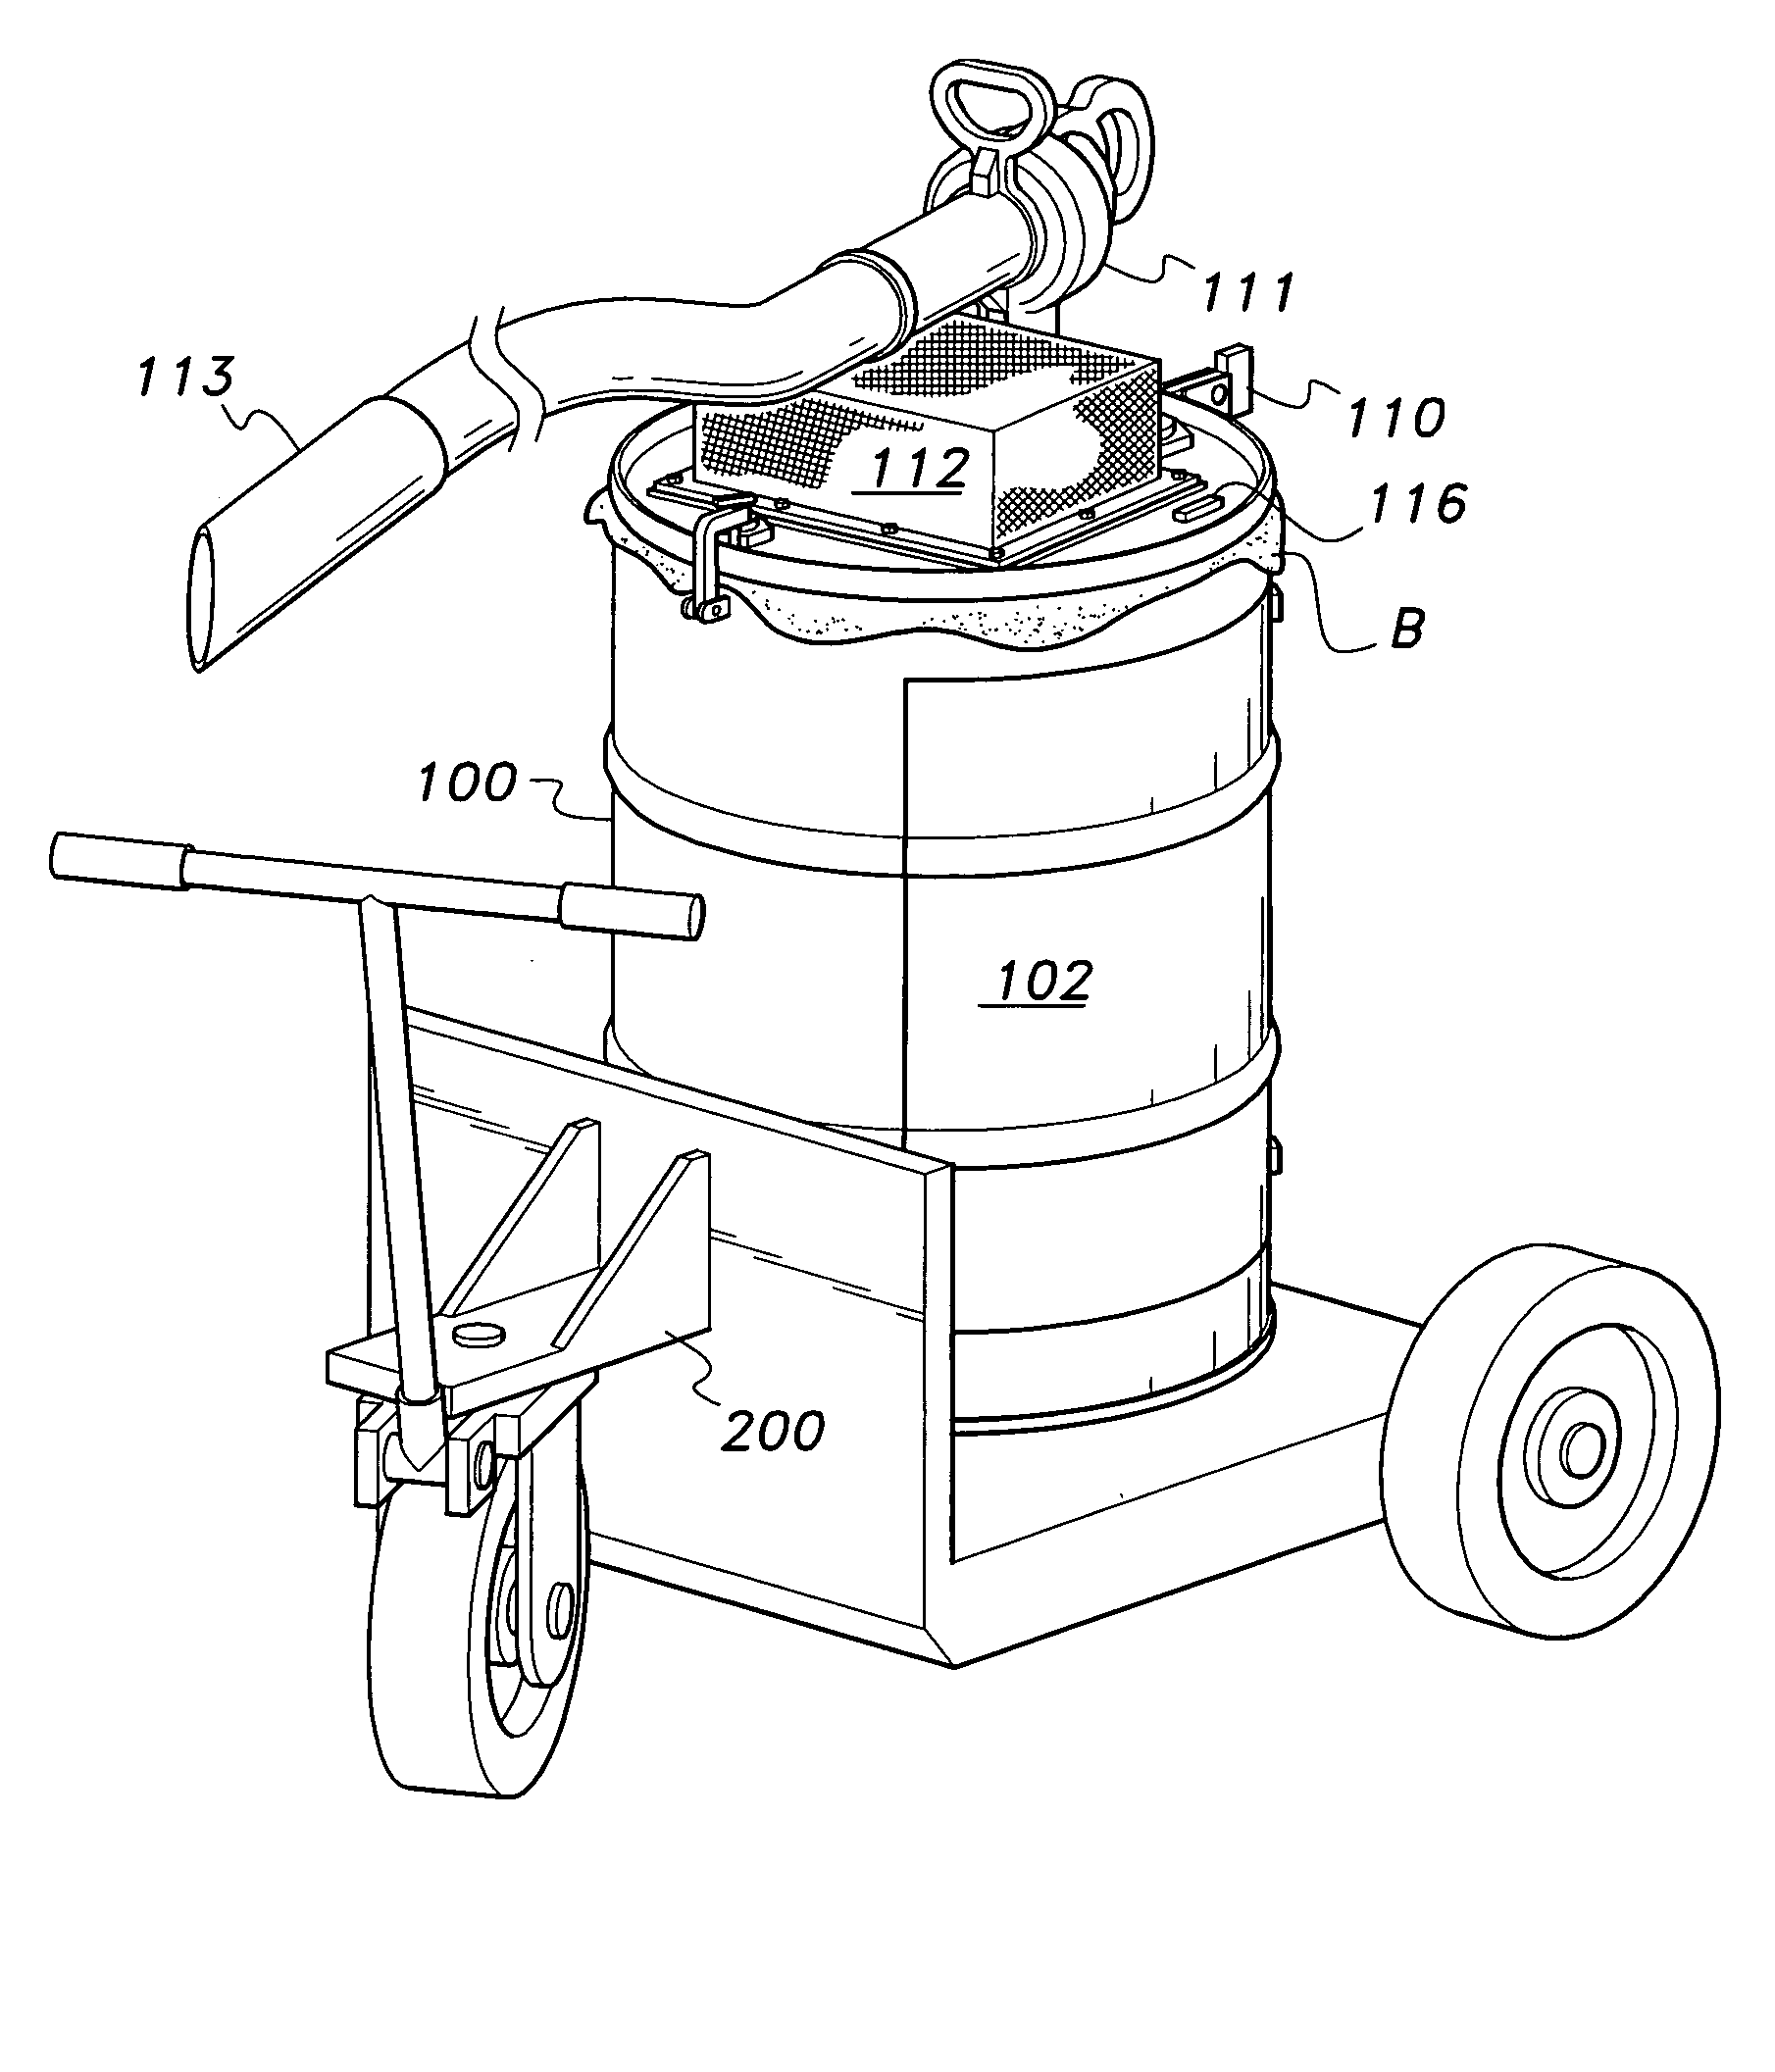 Bagger attachment for leaf blower